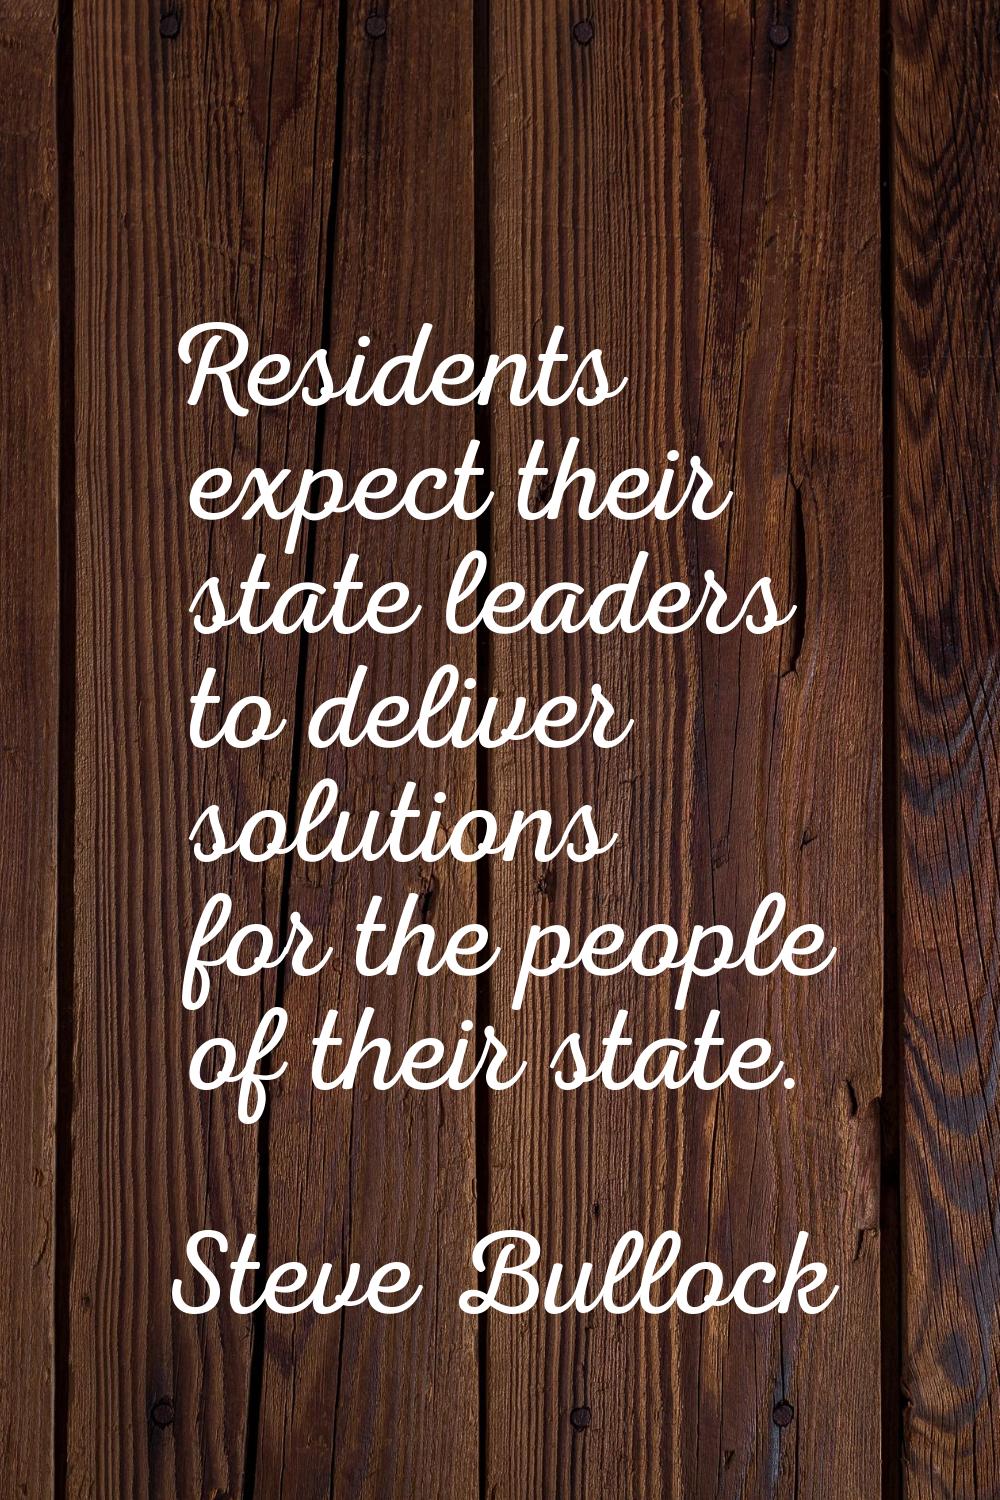 Residents expect their state leaders to deliver solutions for the people of their state.